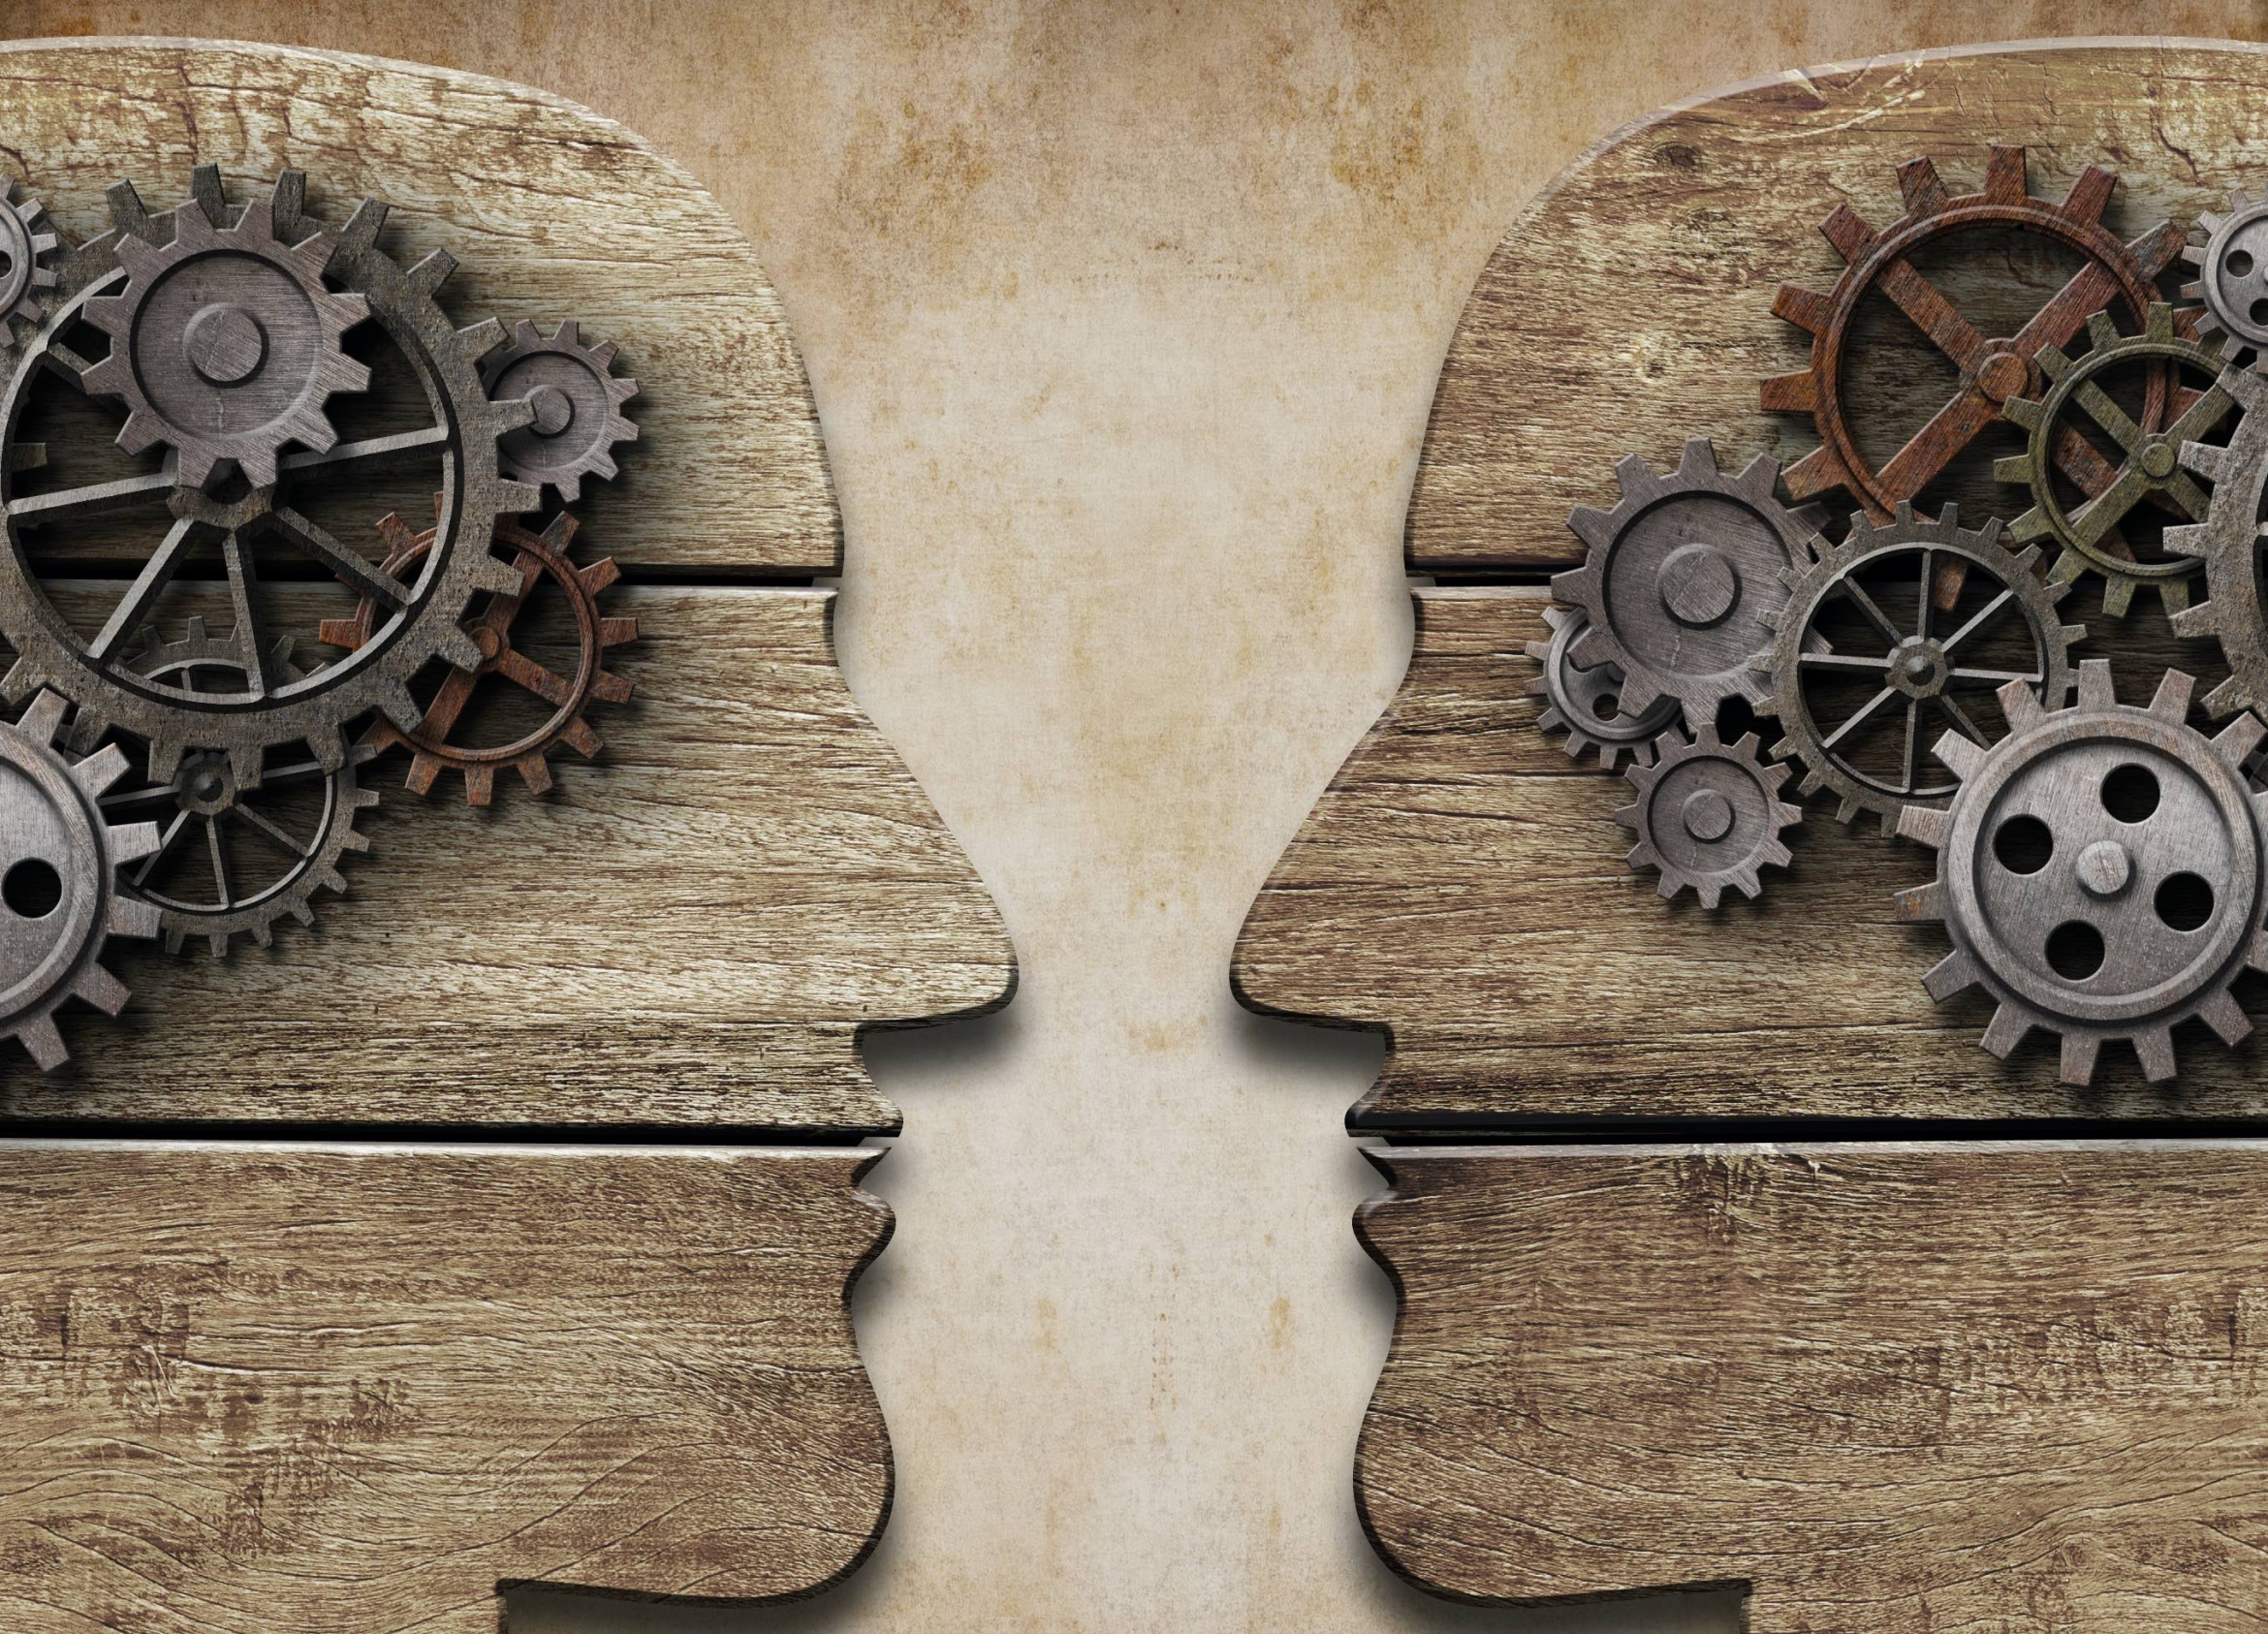 gears as brains on wooden silhouettes of heads facing each other